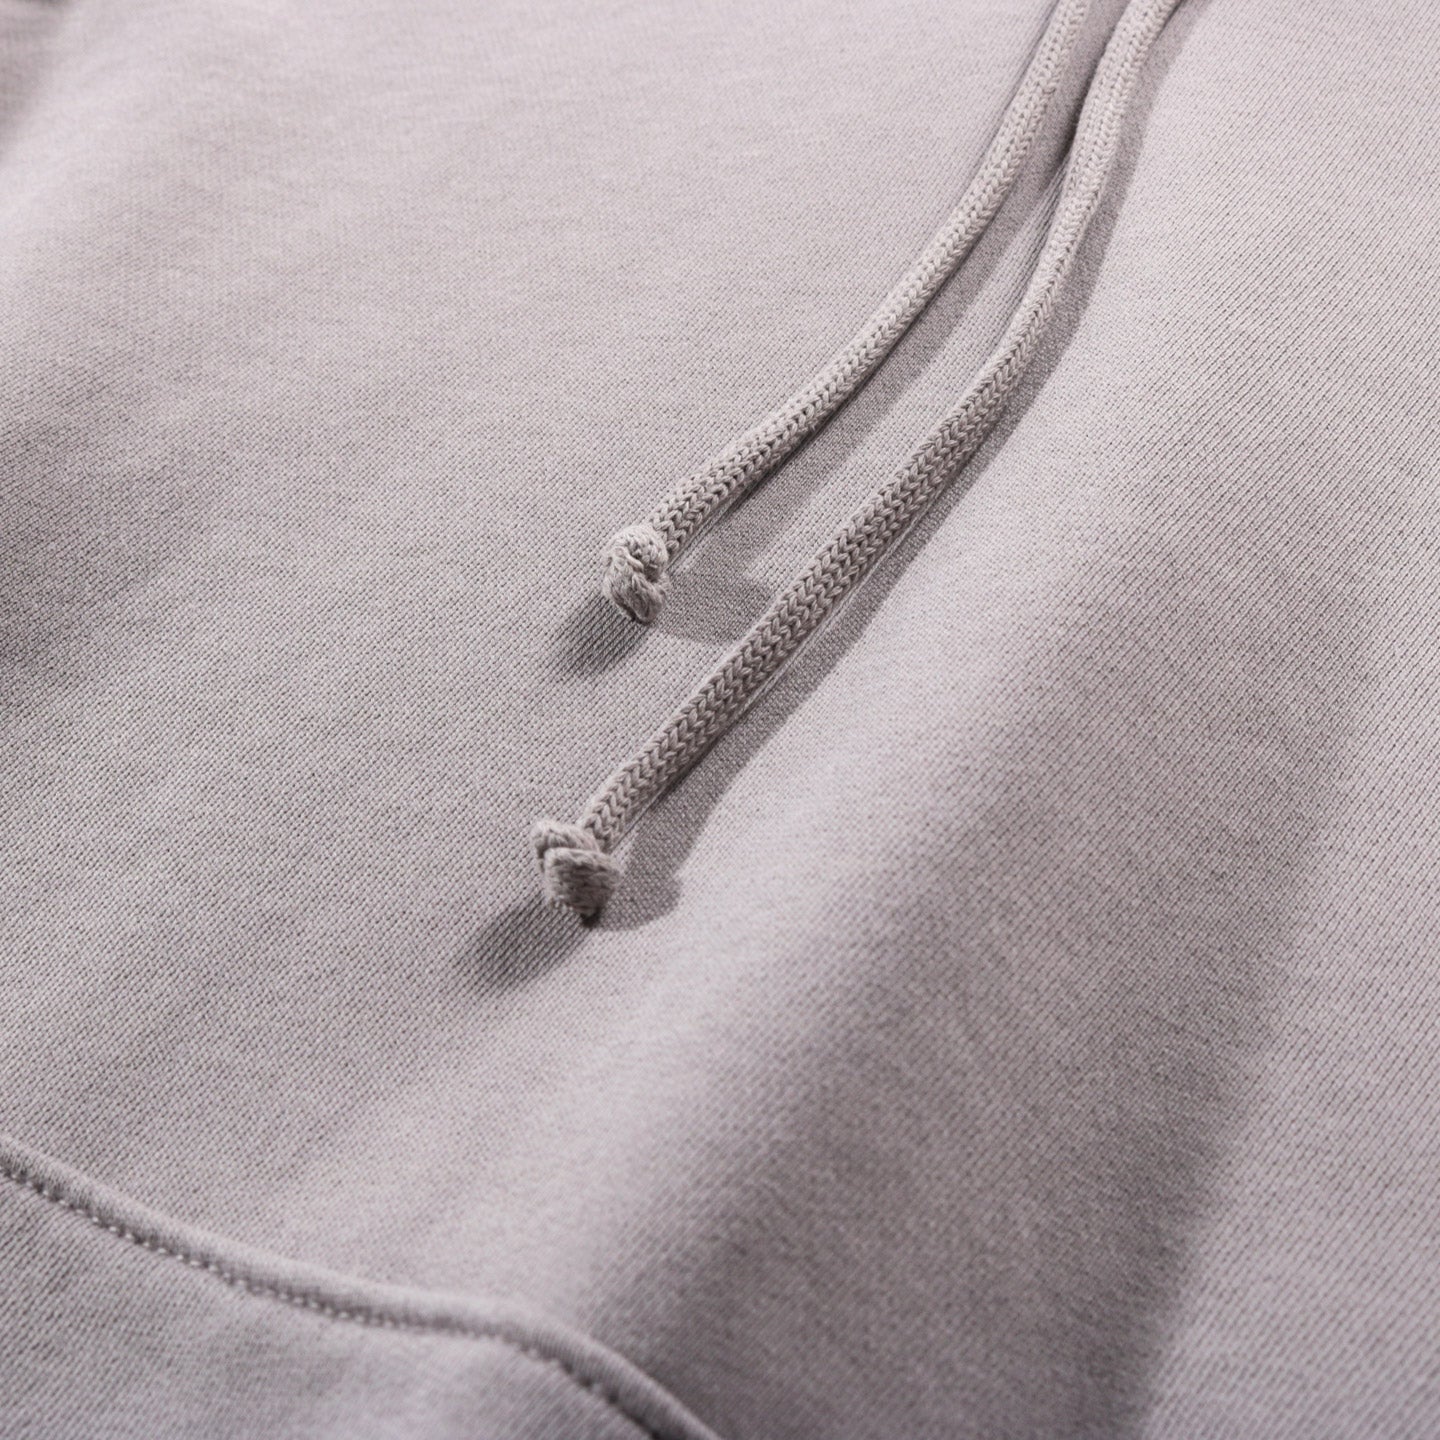 LADY WHITE CO. CLASSIC FIT HOODIE TRUE GREY